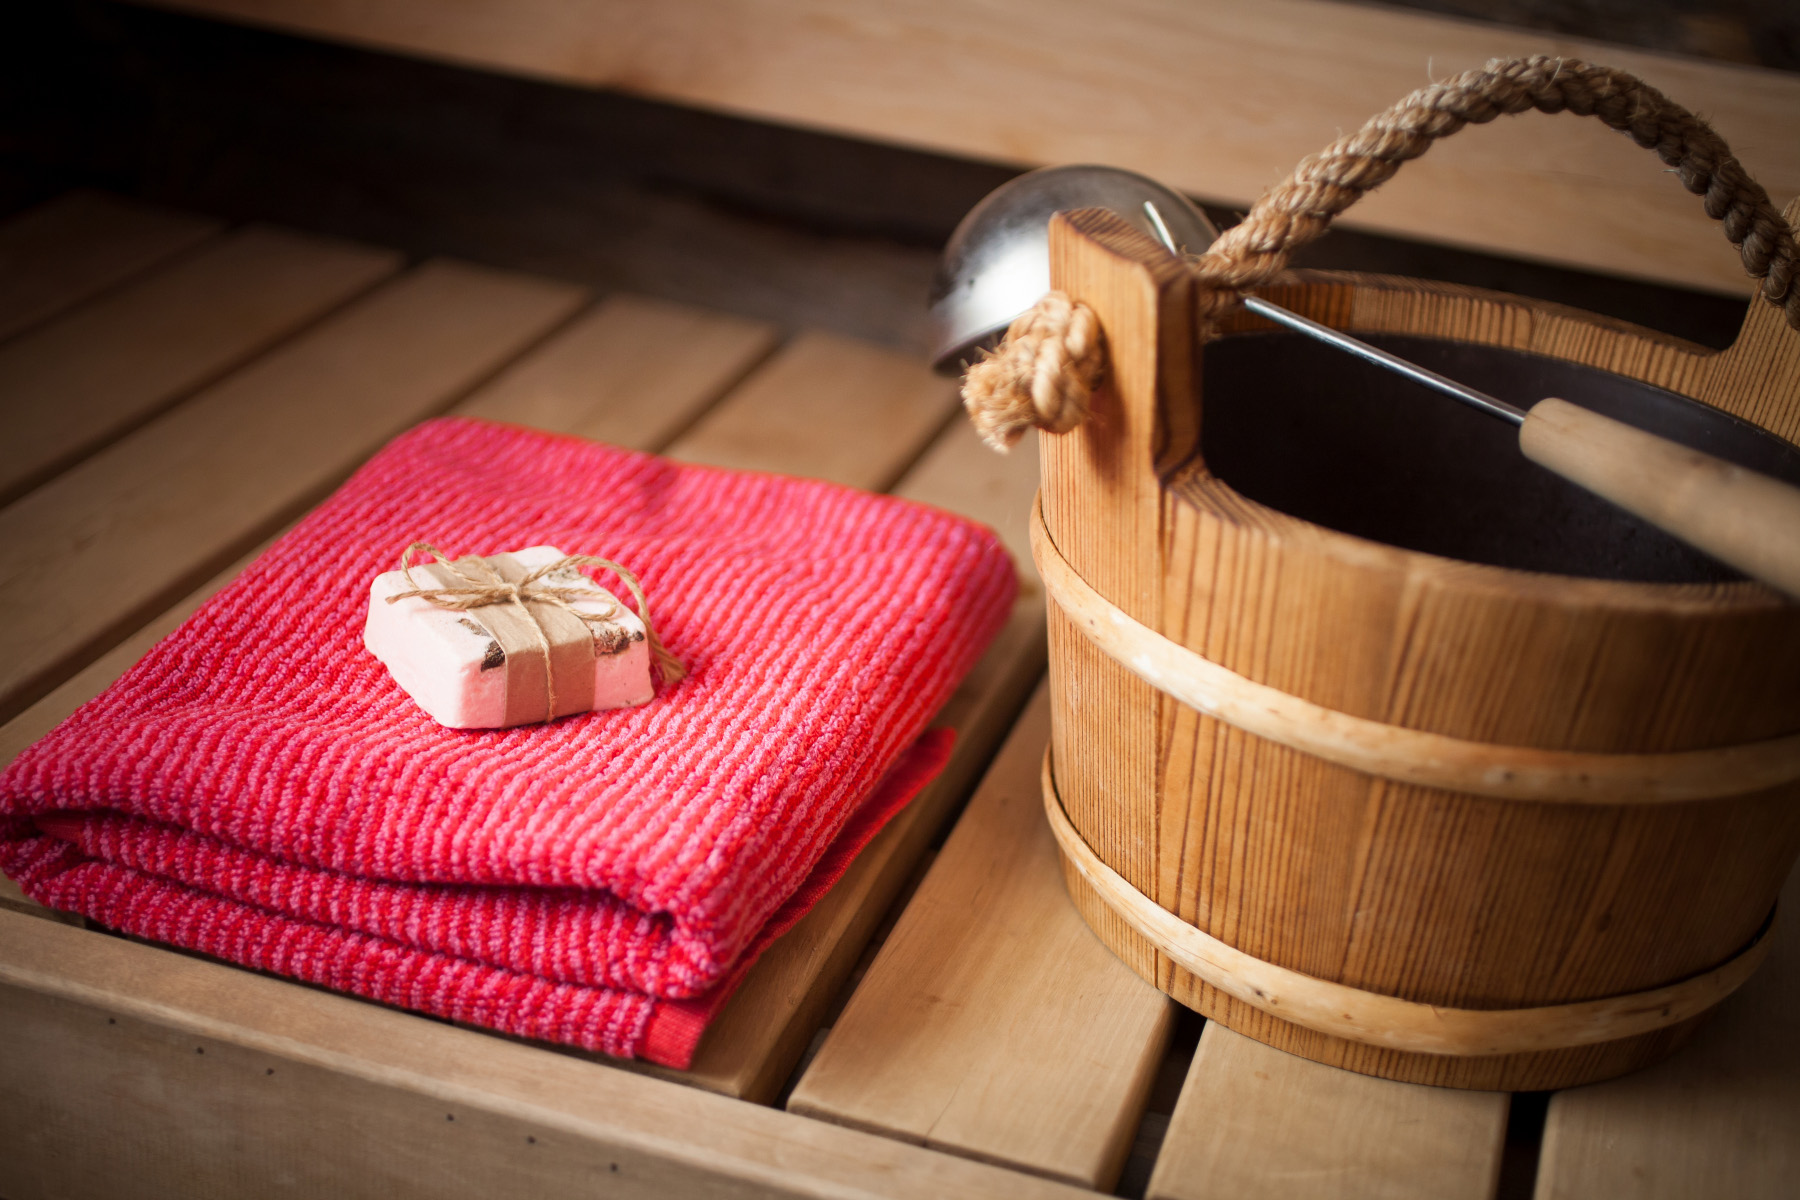 Finland's sauna culture inscribed on UNESCO Intangible Cultural Heritage  List - OKM - Ministry of Education and Culture, Finland